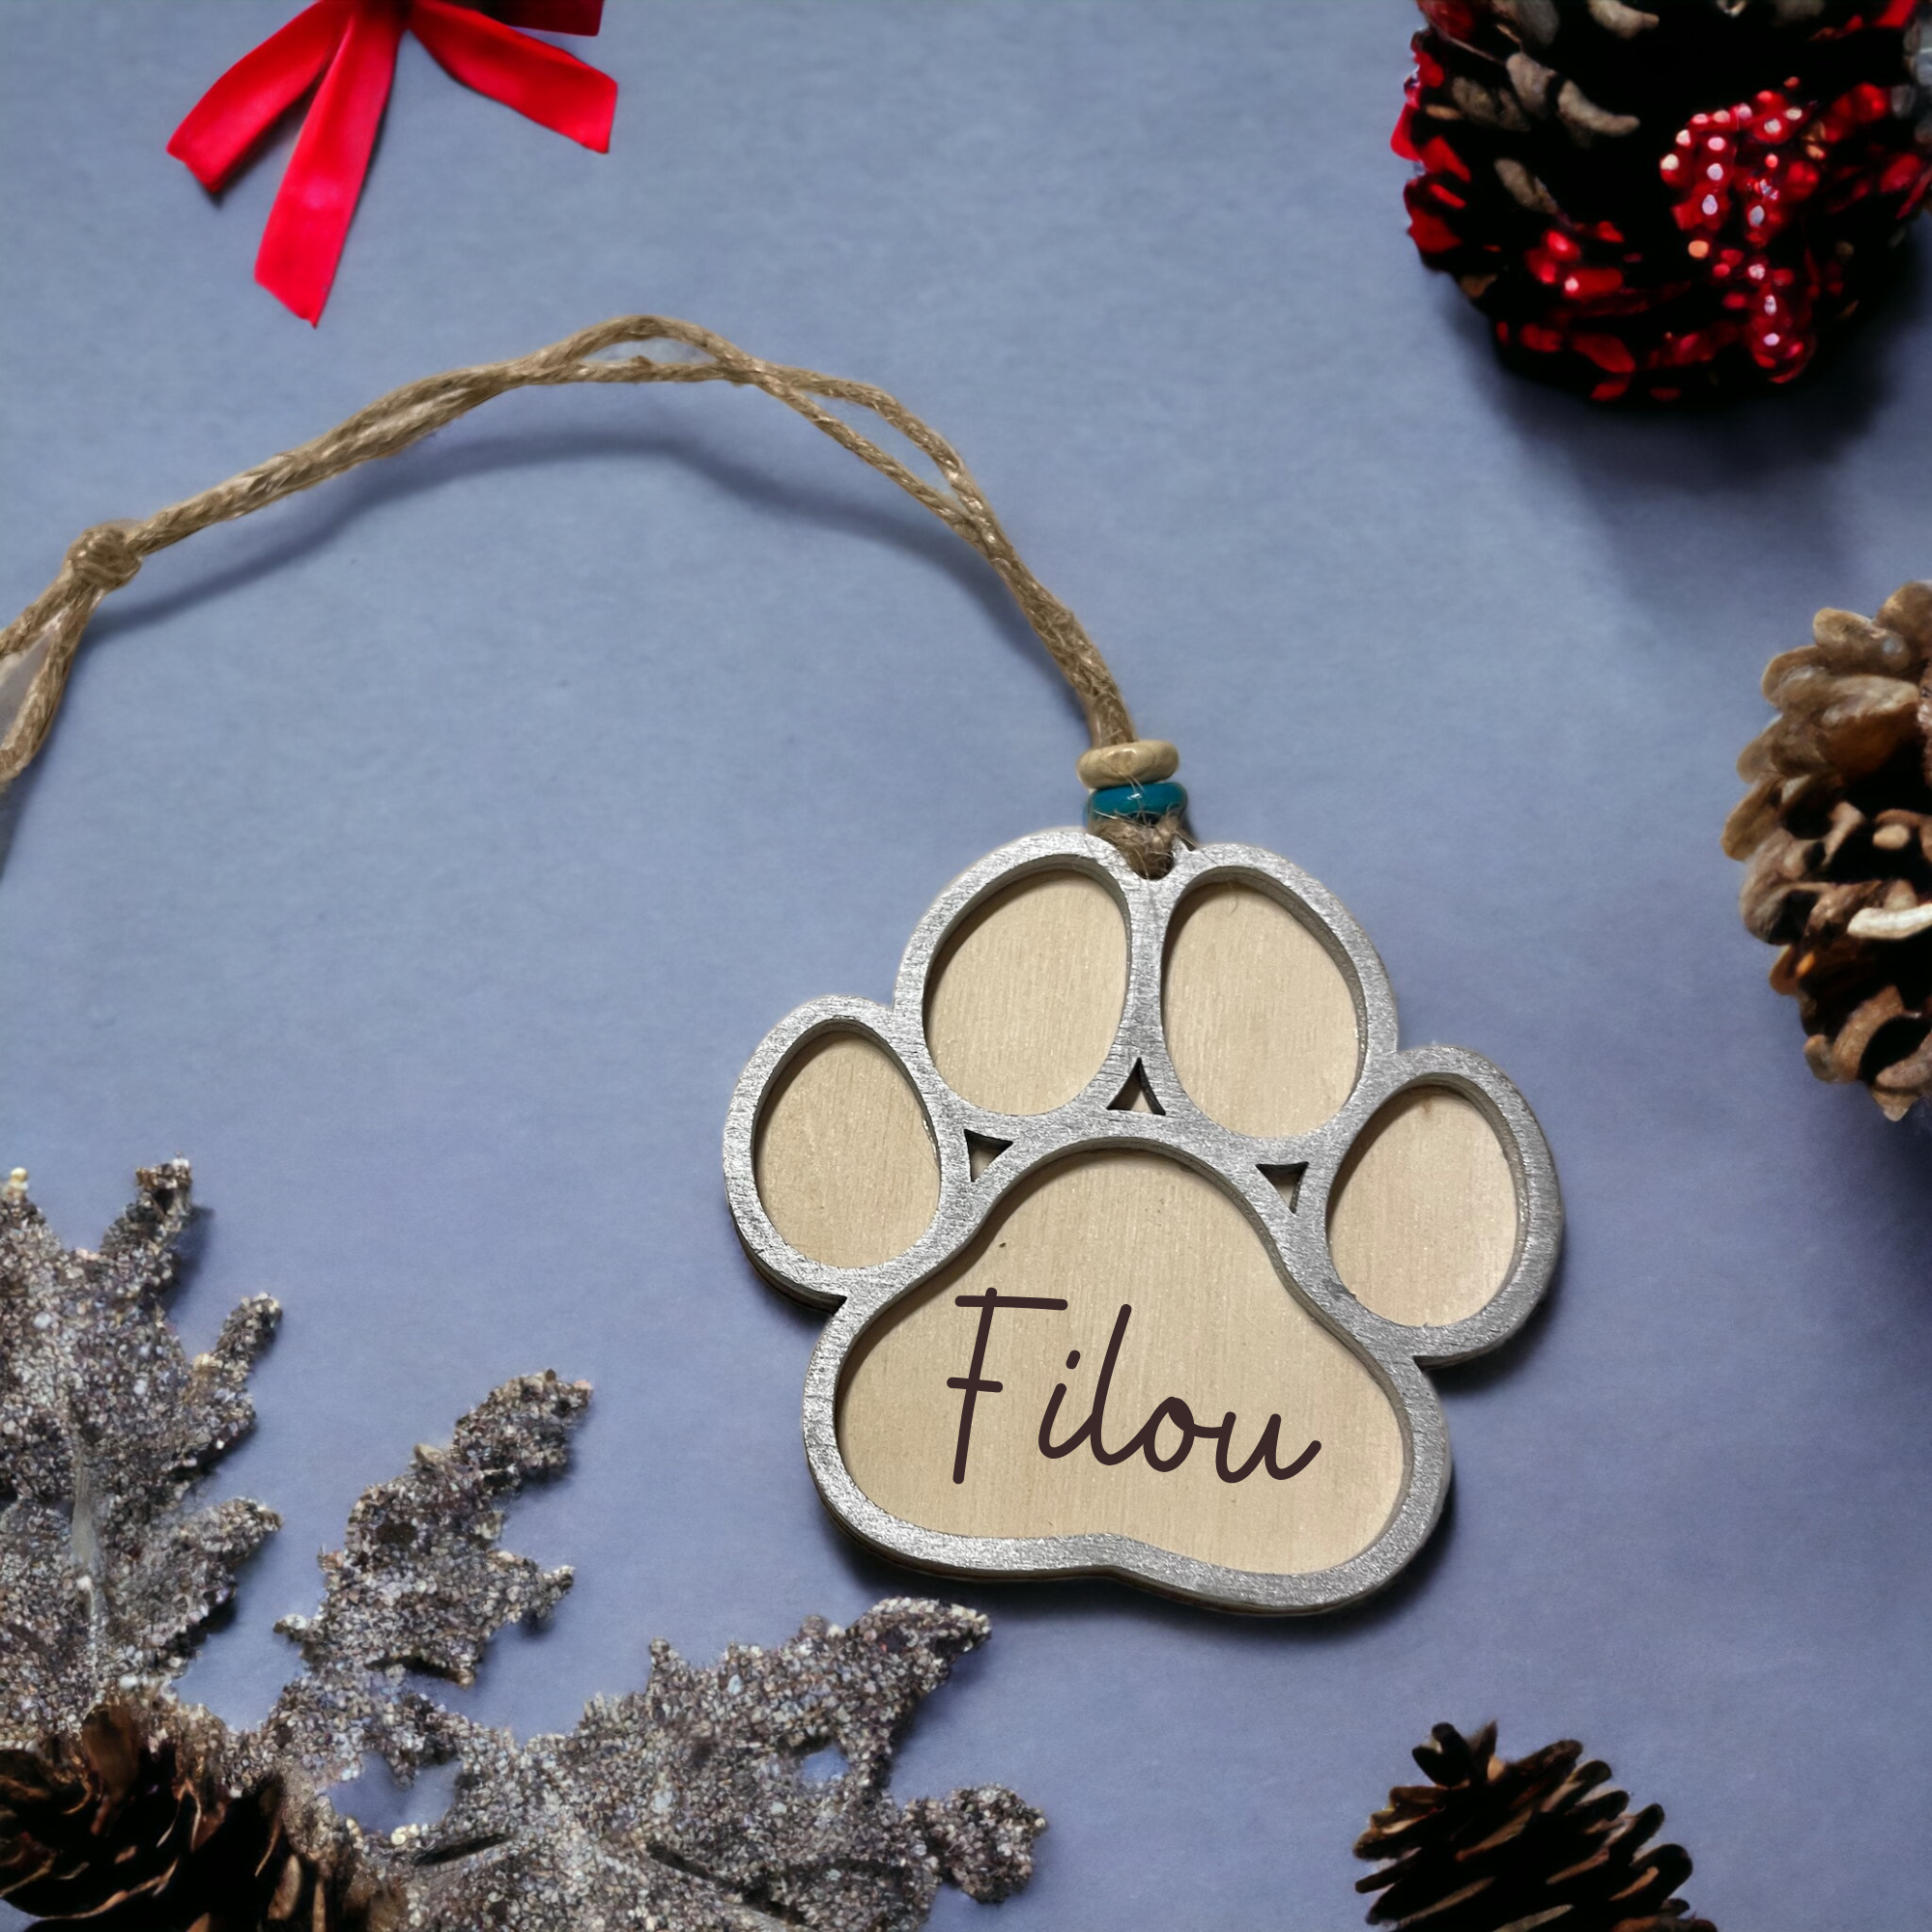 Handmade Wooden Pet Ornament: Personalize with Your Pet's Name